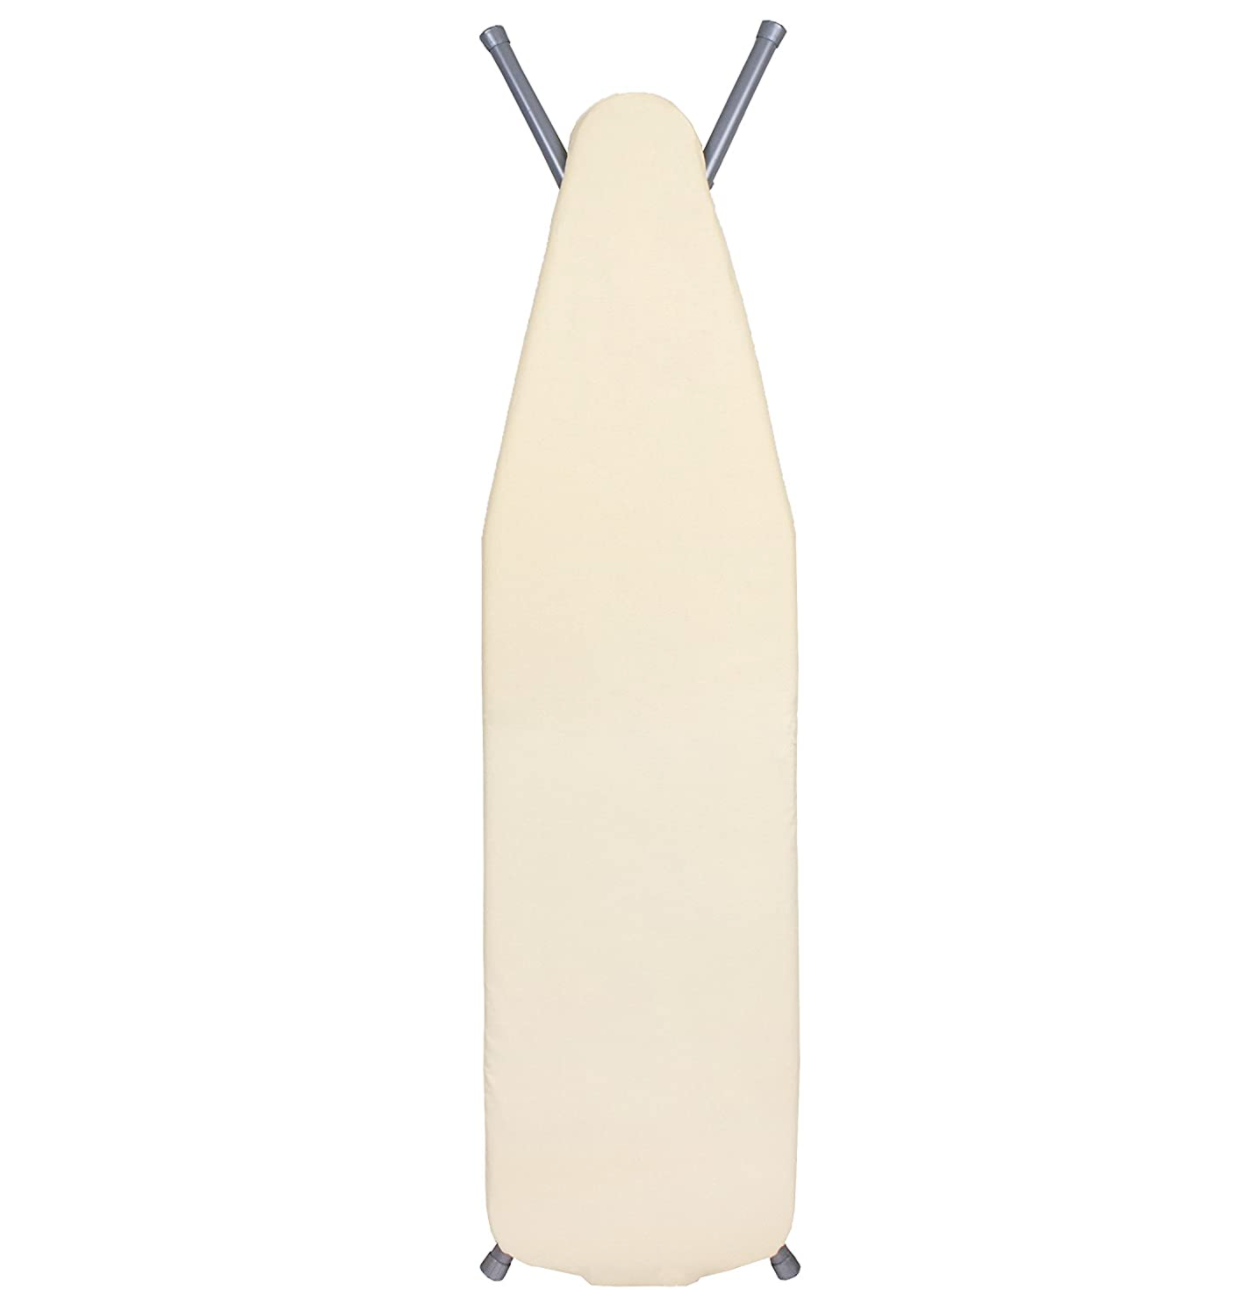 Ritz Ironing Board Treated Cotton Cover – Standard Sized 54” – Natural